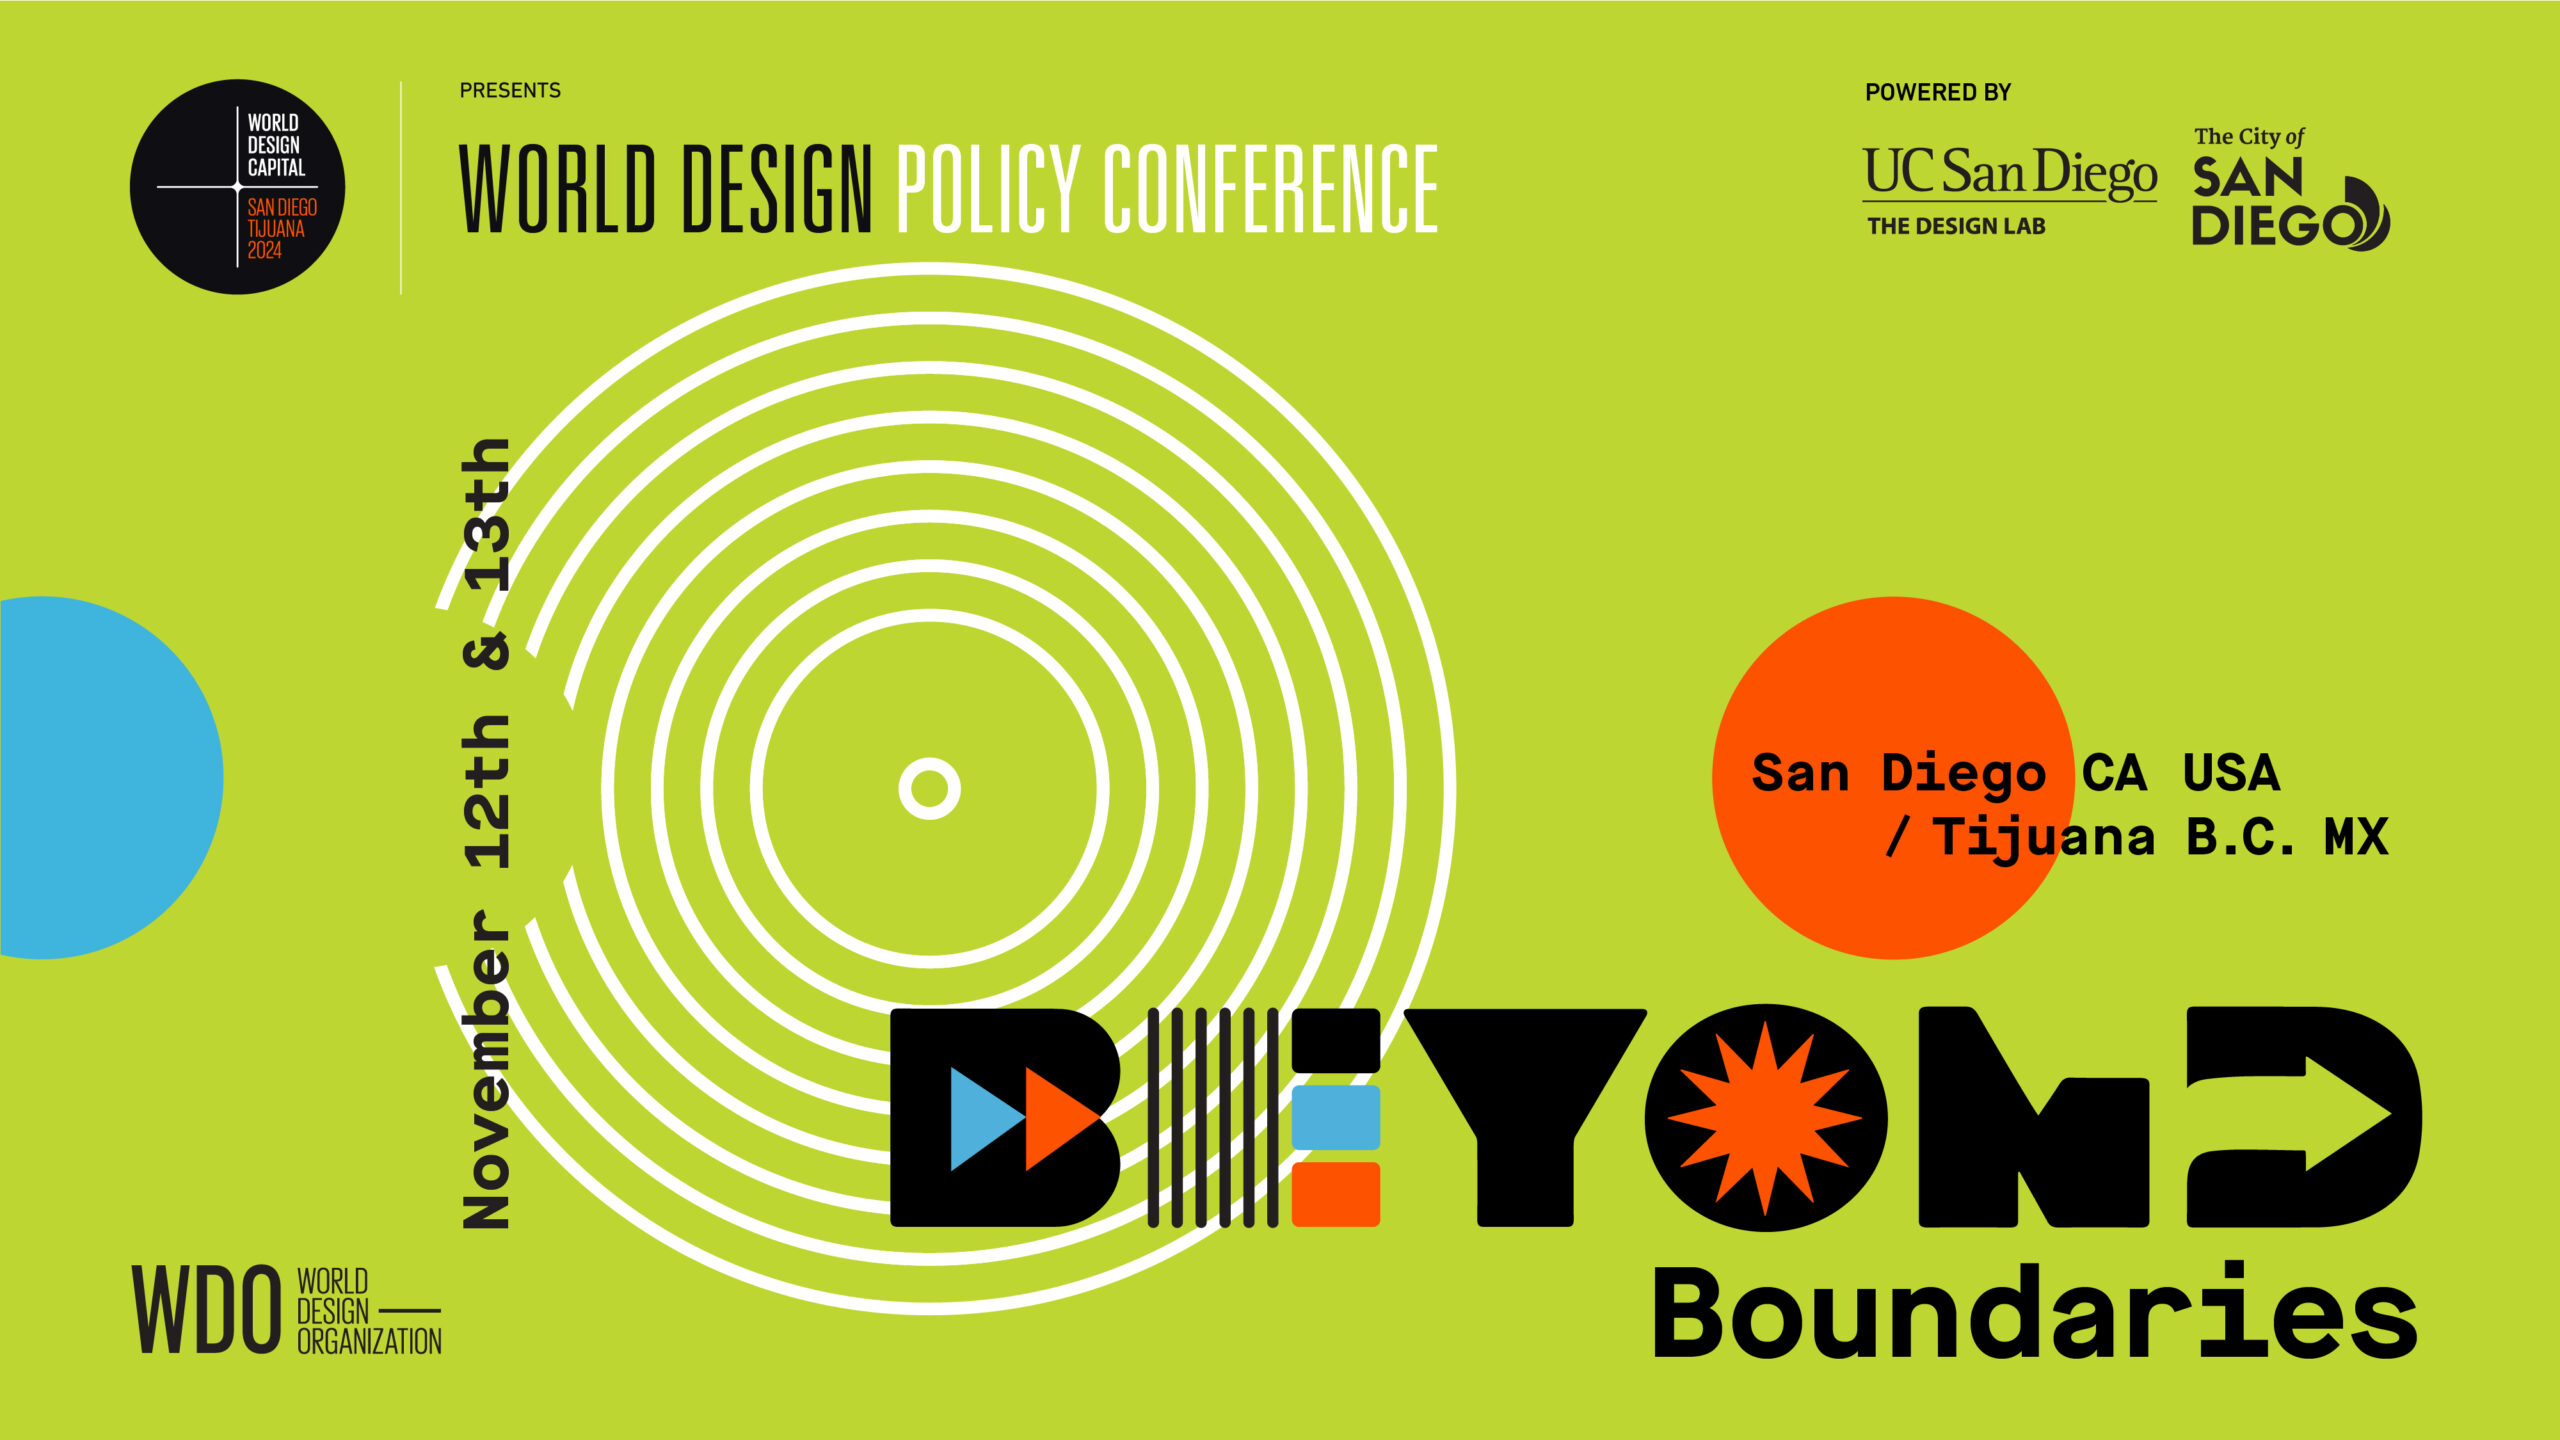 World Design Policy Conference: Beyond Boundaries